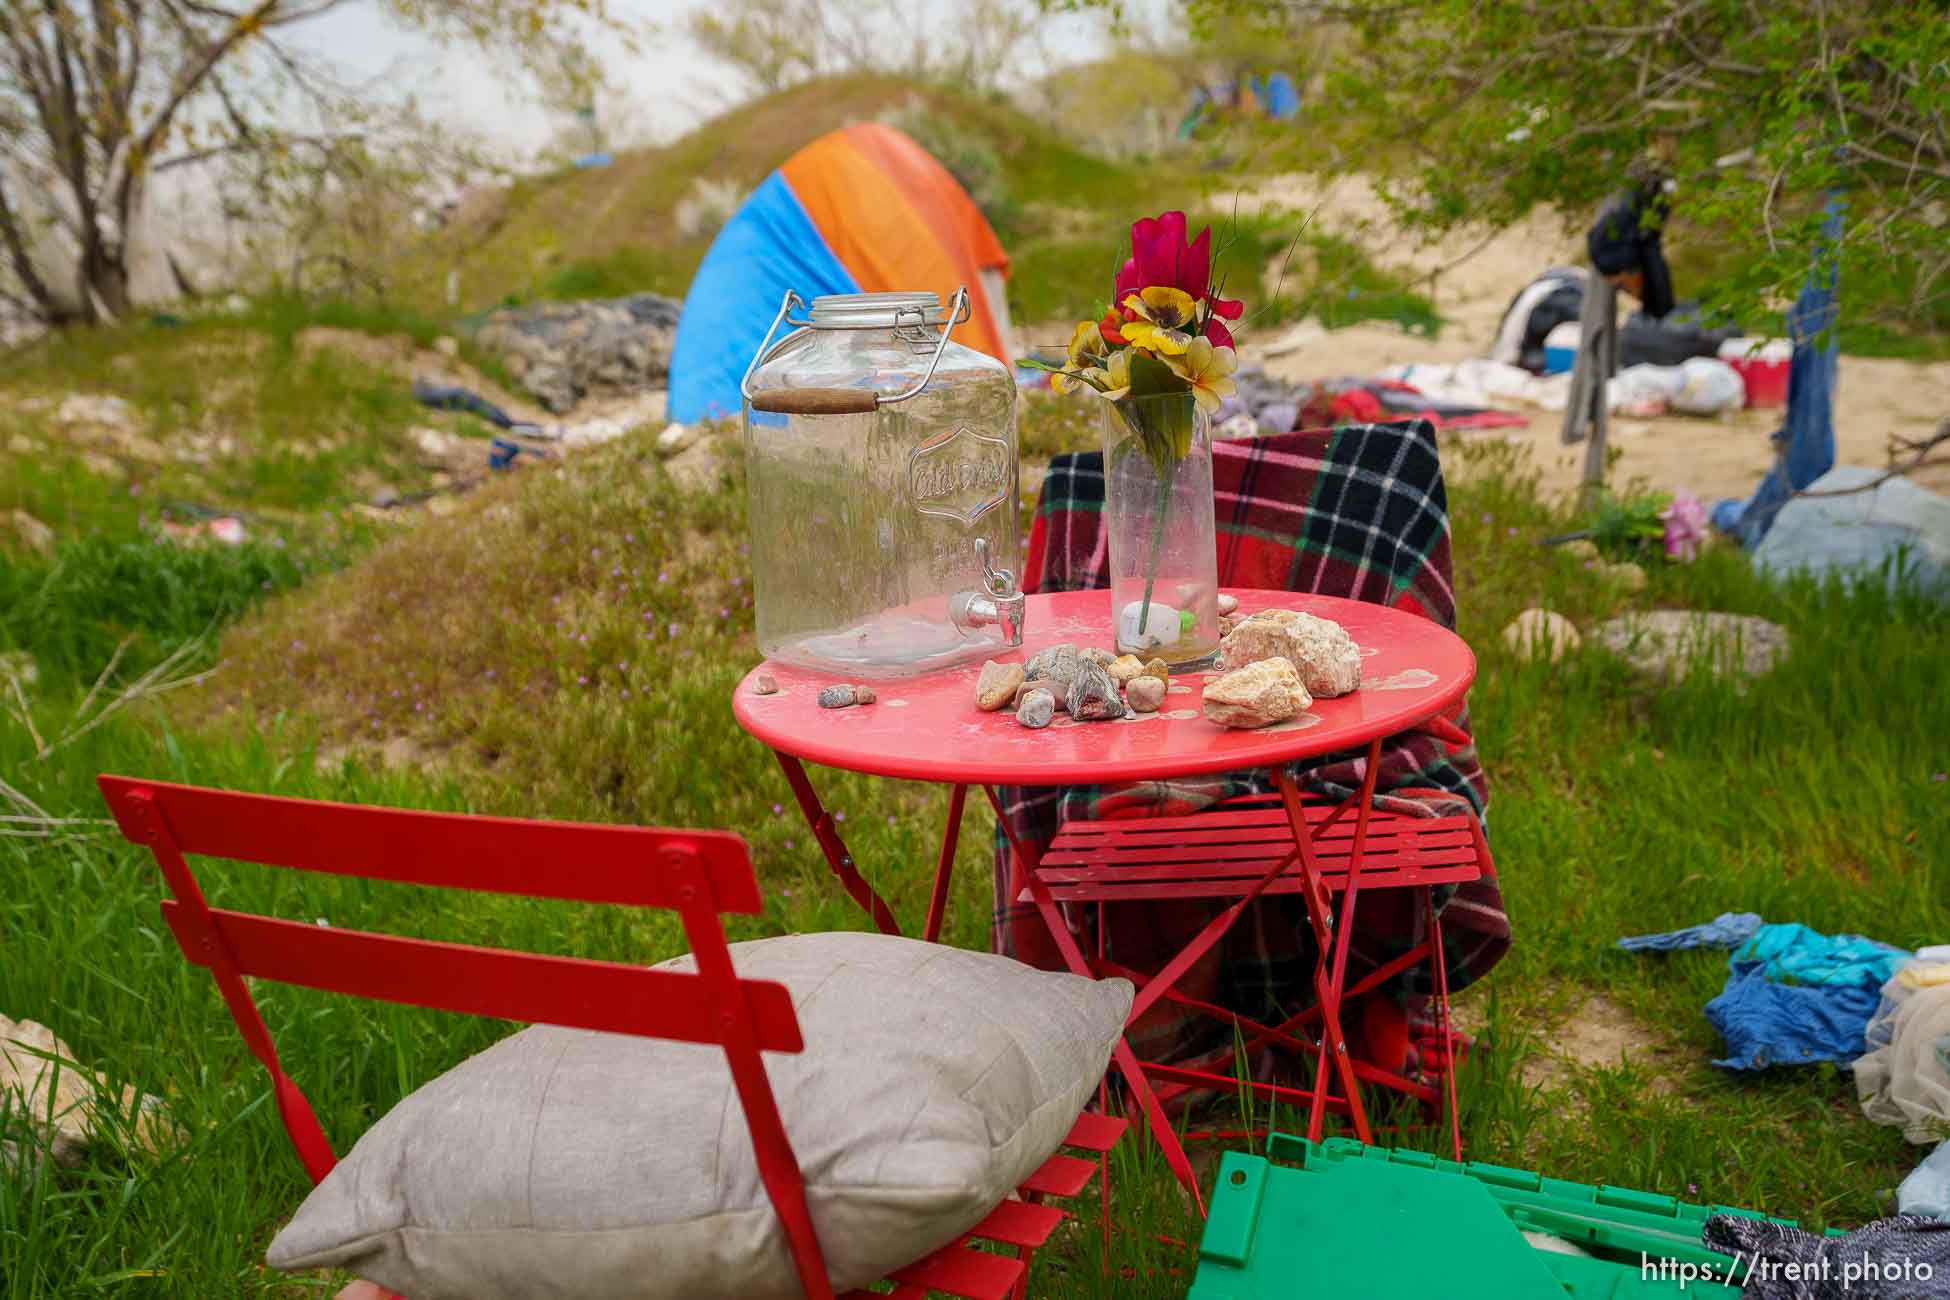 (Trent Nelson  |  The Salt Lake Tribune) A table setting at a camp east of Victory Road in the foothills north of Salt Lake City on Wednesday, April 27, 2022.